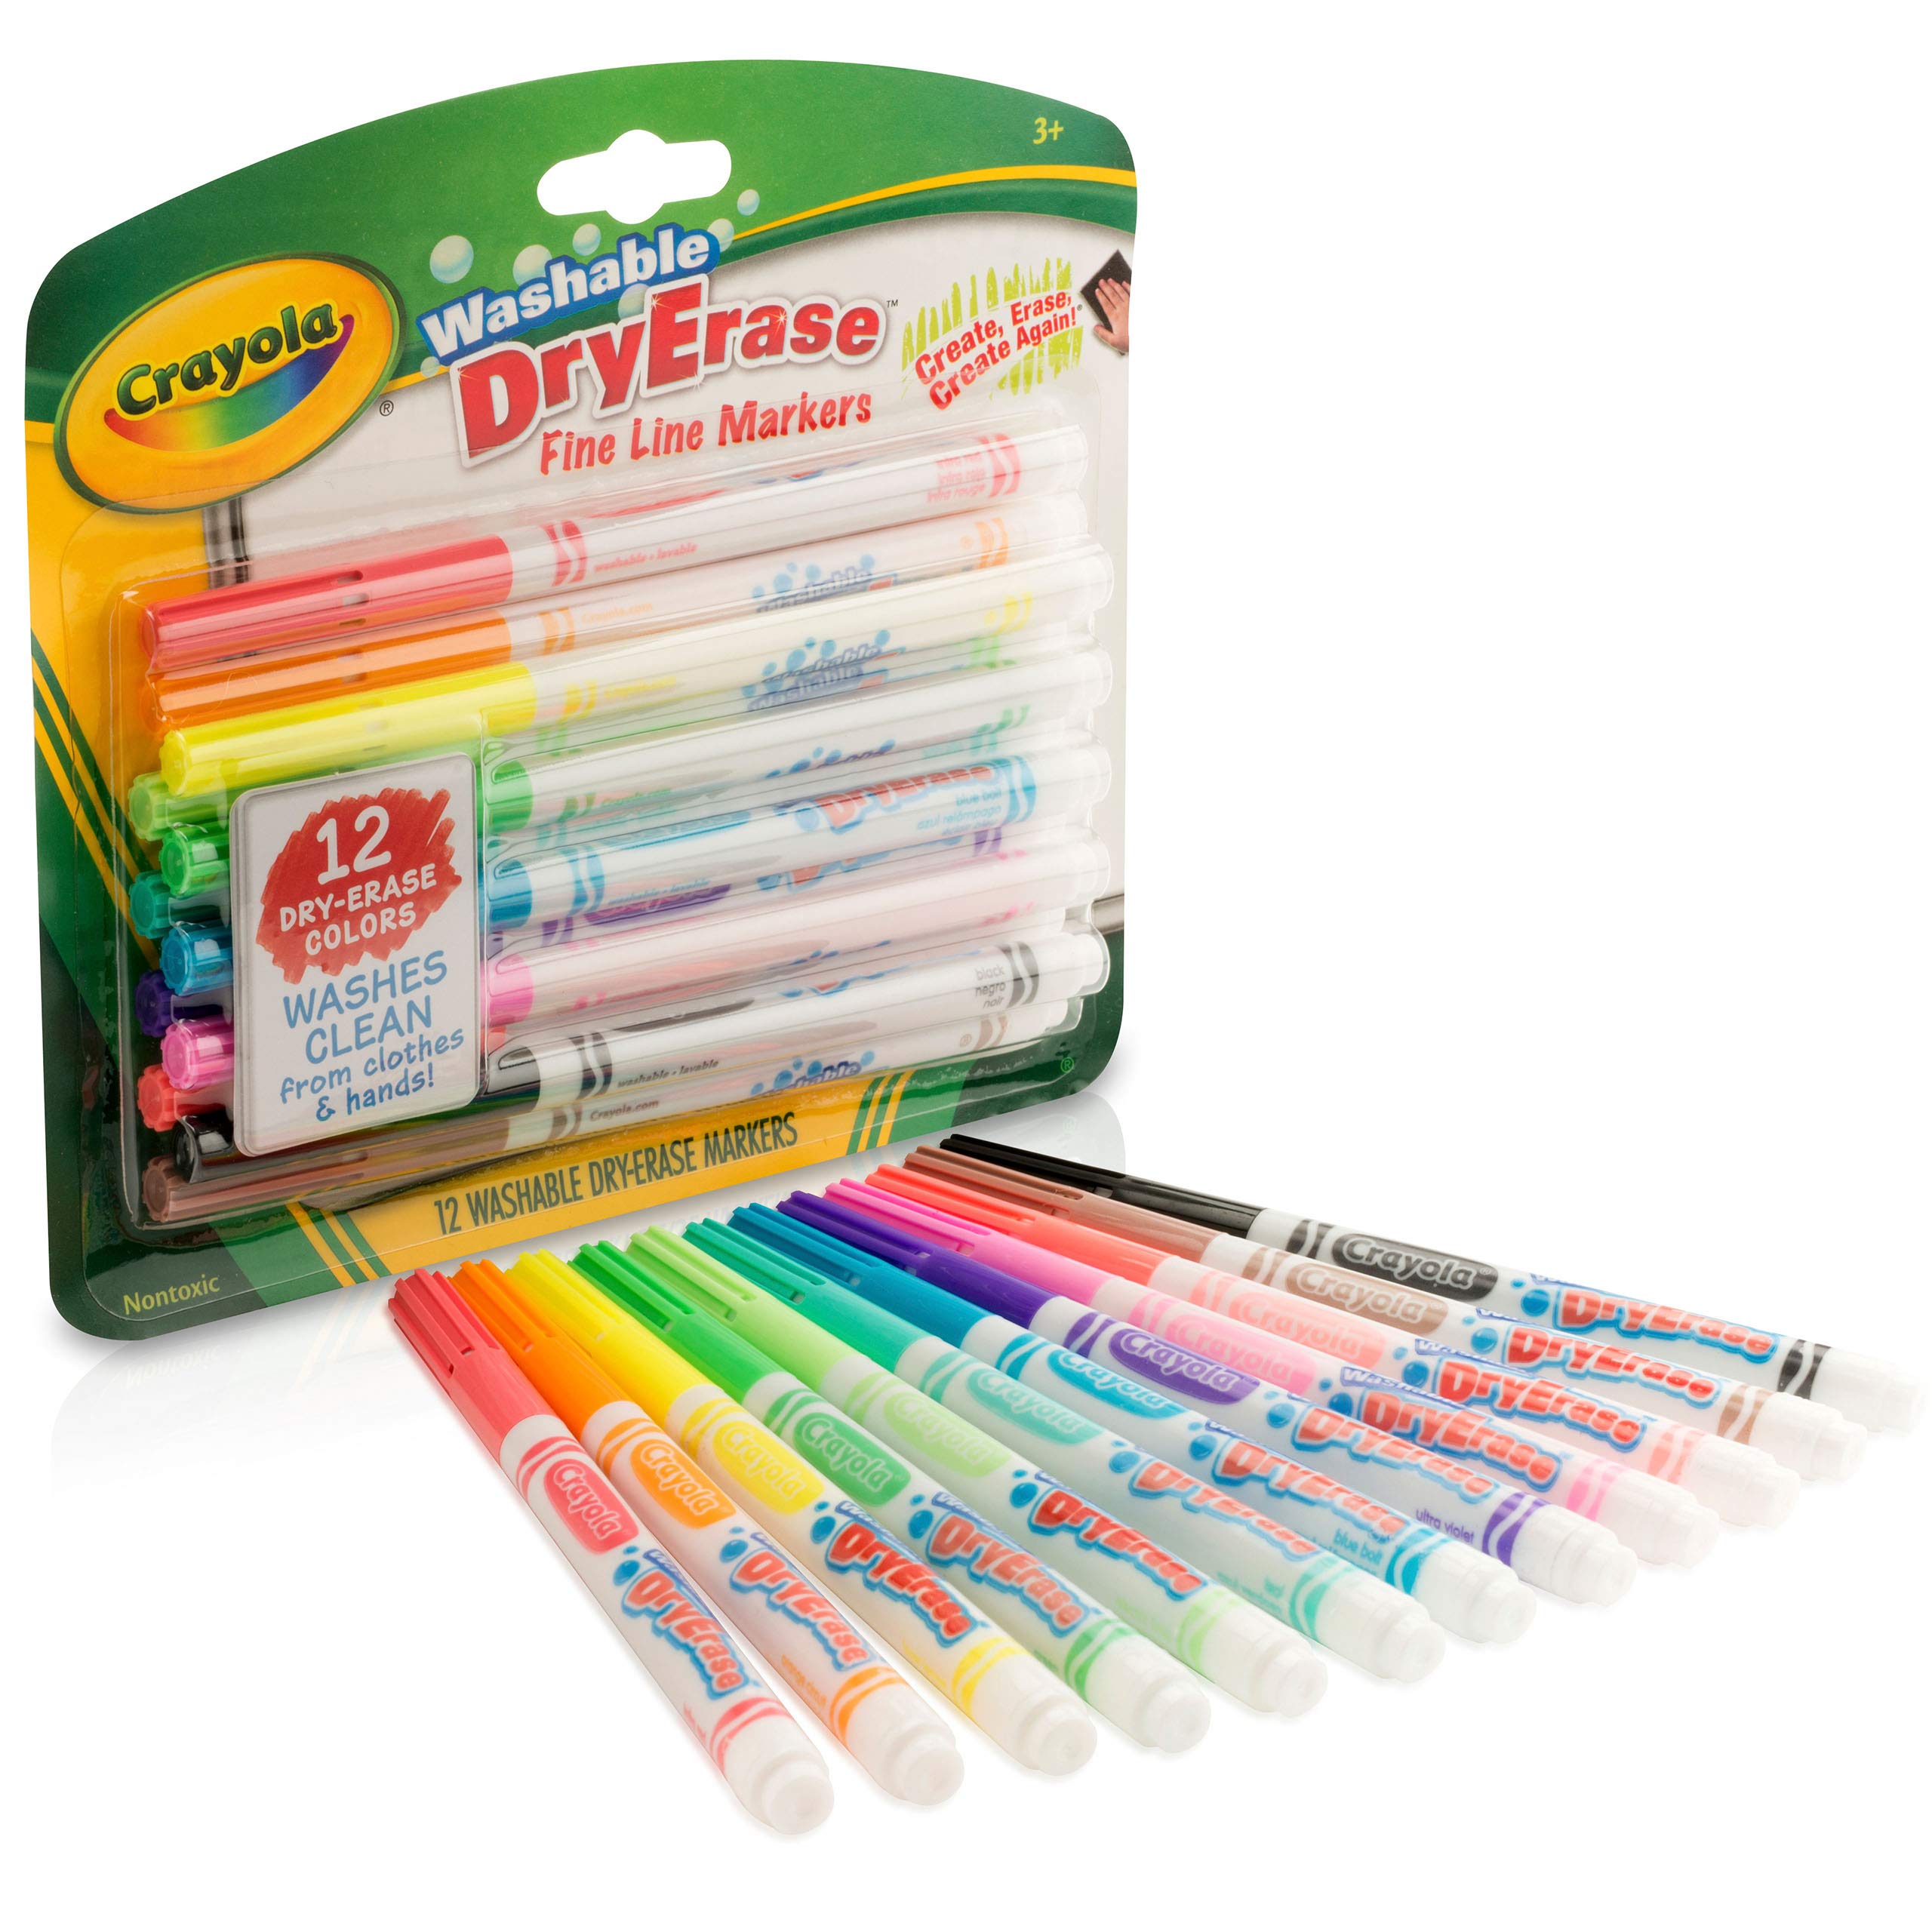 Crayola Washable Dry-Erase Fine Line Markers, 12 Classic Colors NonToxic Art Tools for Kids & Toddlers 3+